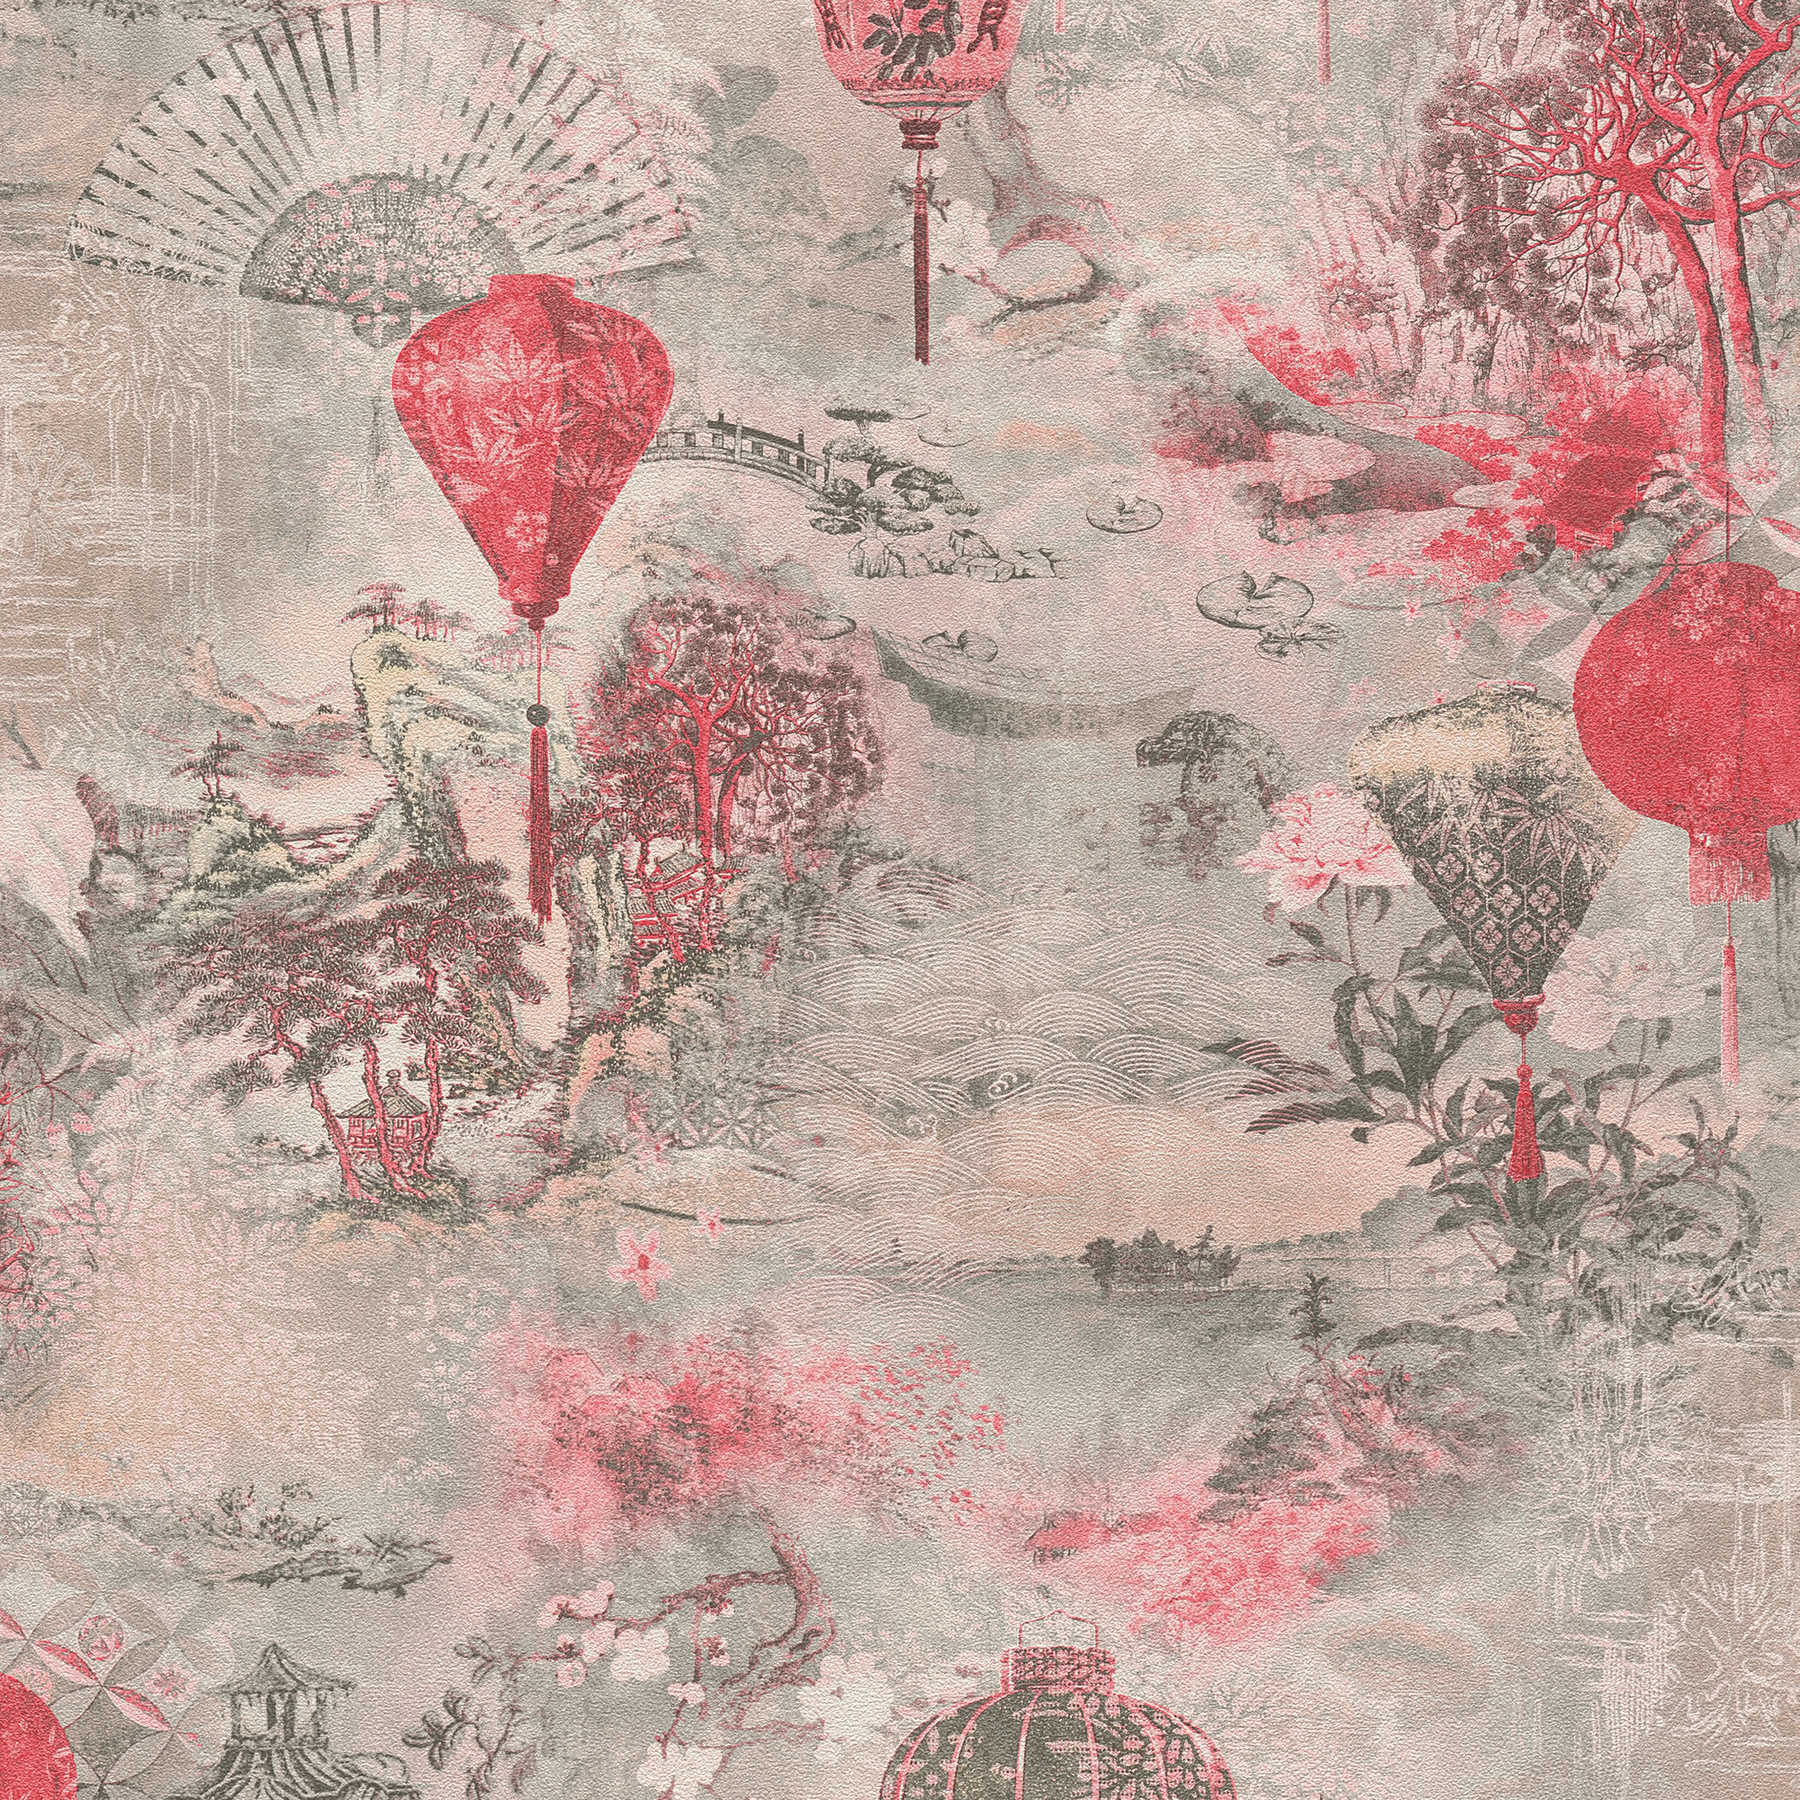         Non-woven wallpaper with landscape motif and Asian decor - grey, red, pink
    